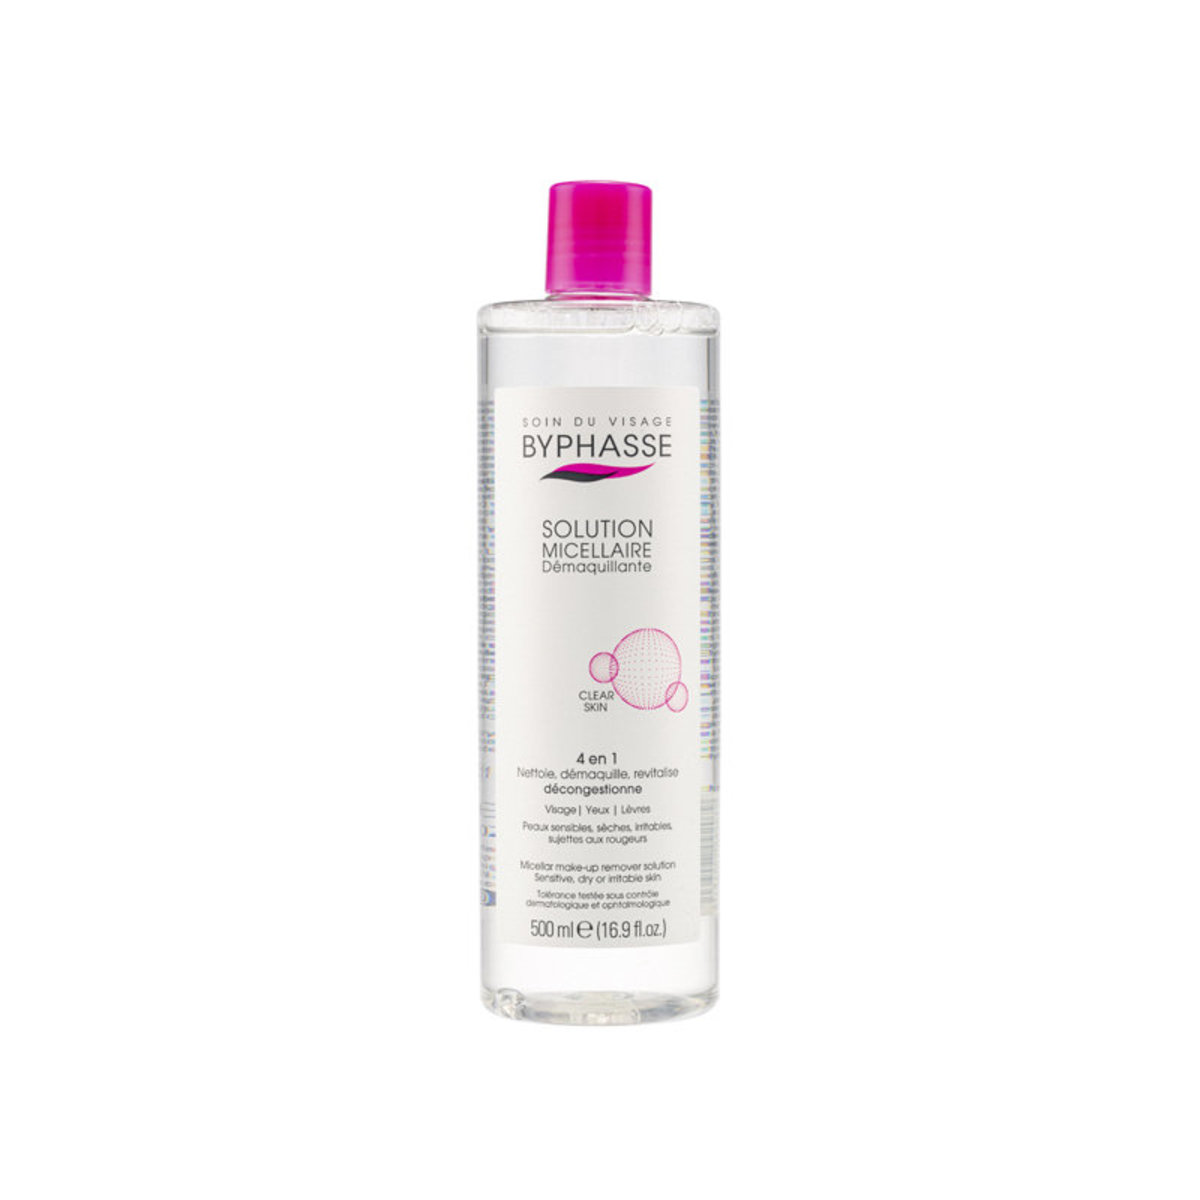 Byphasse Micellar Make-up Remover Solution (500ml)